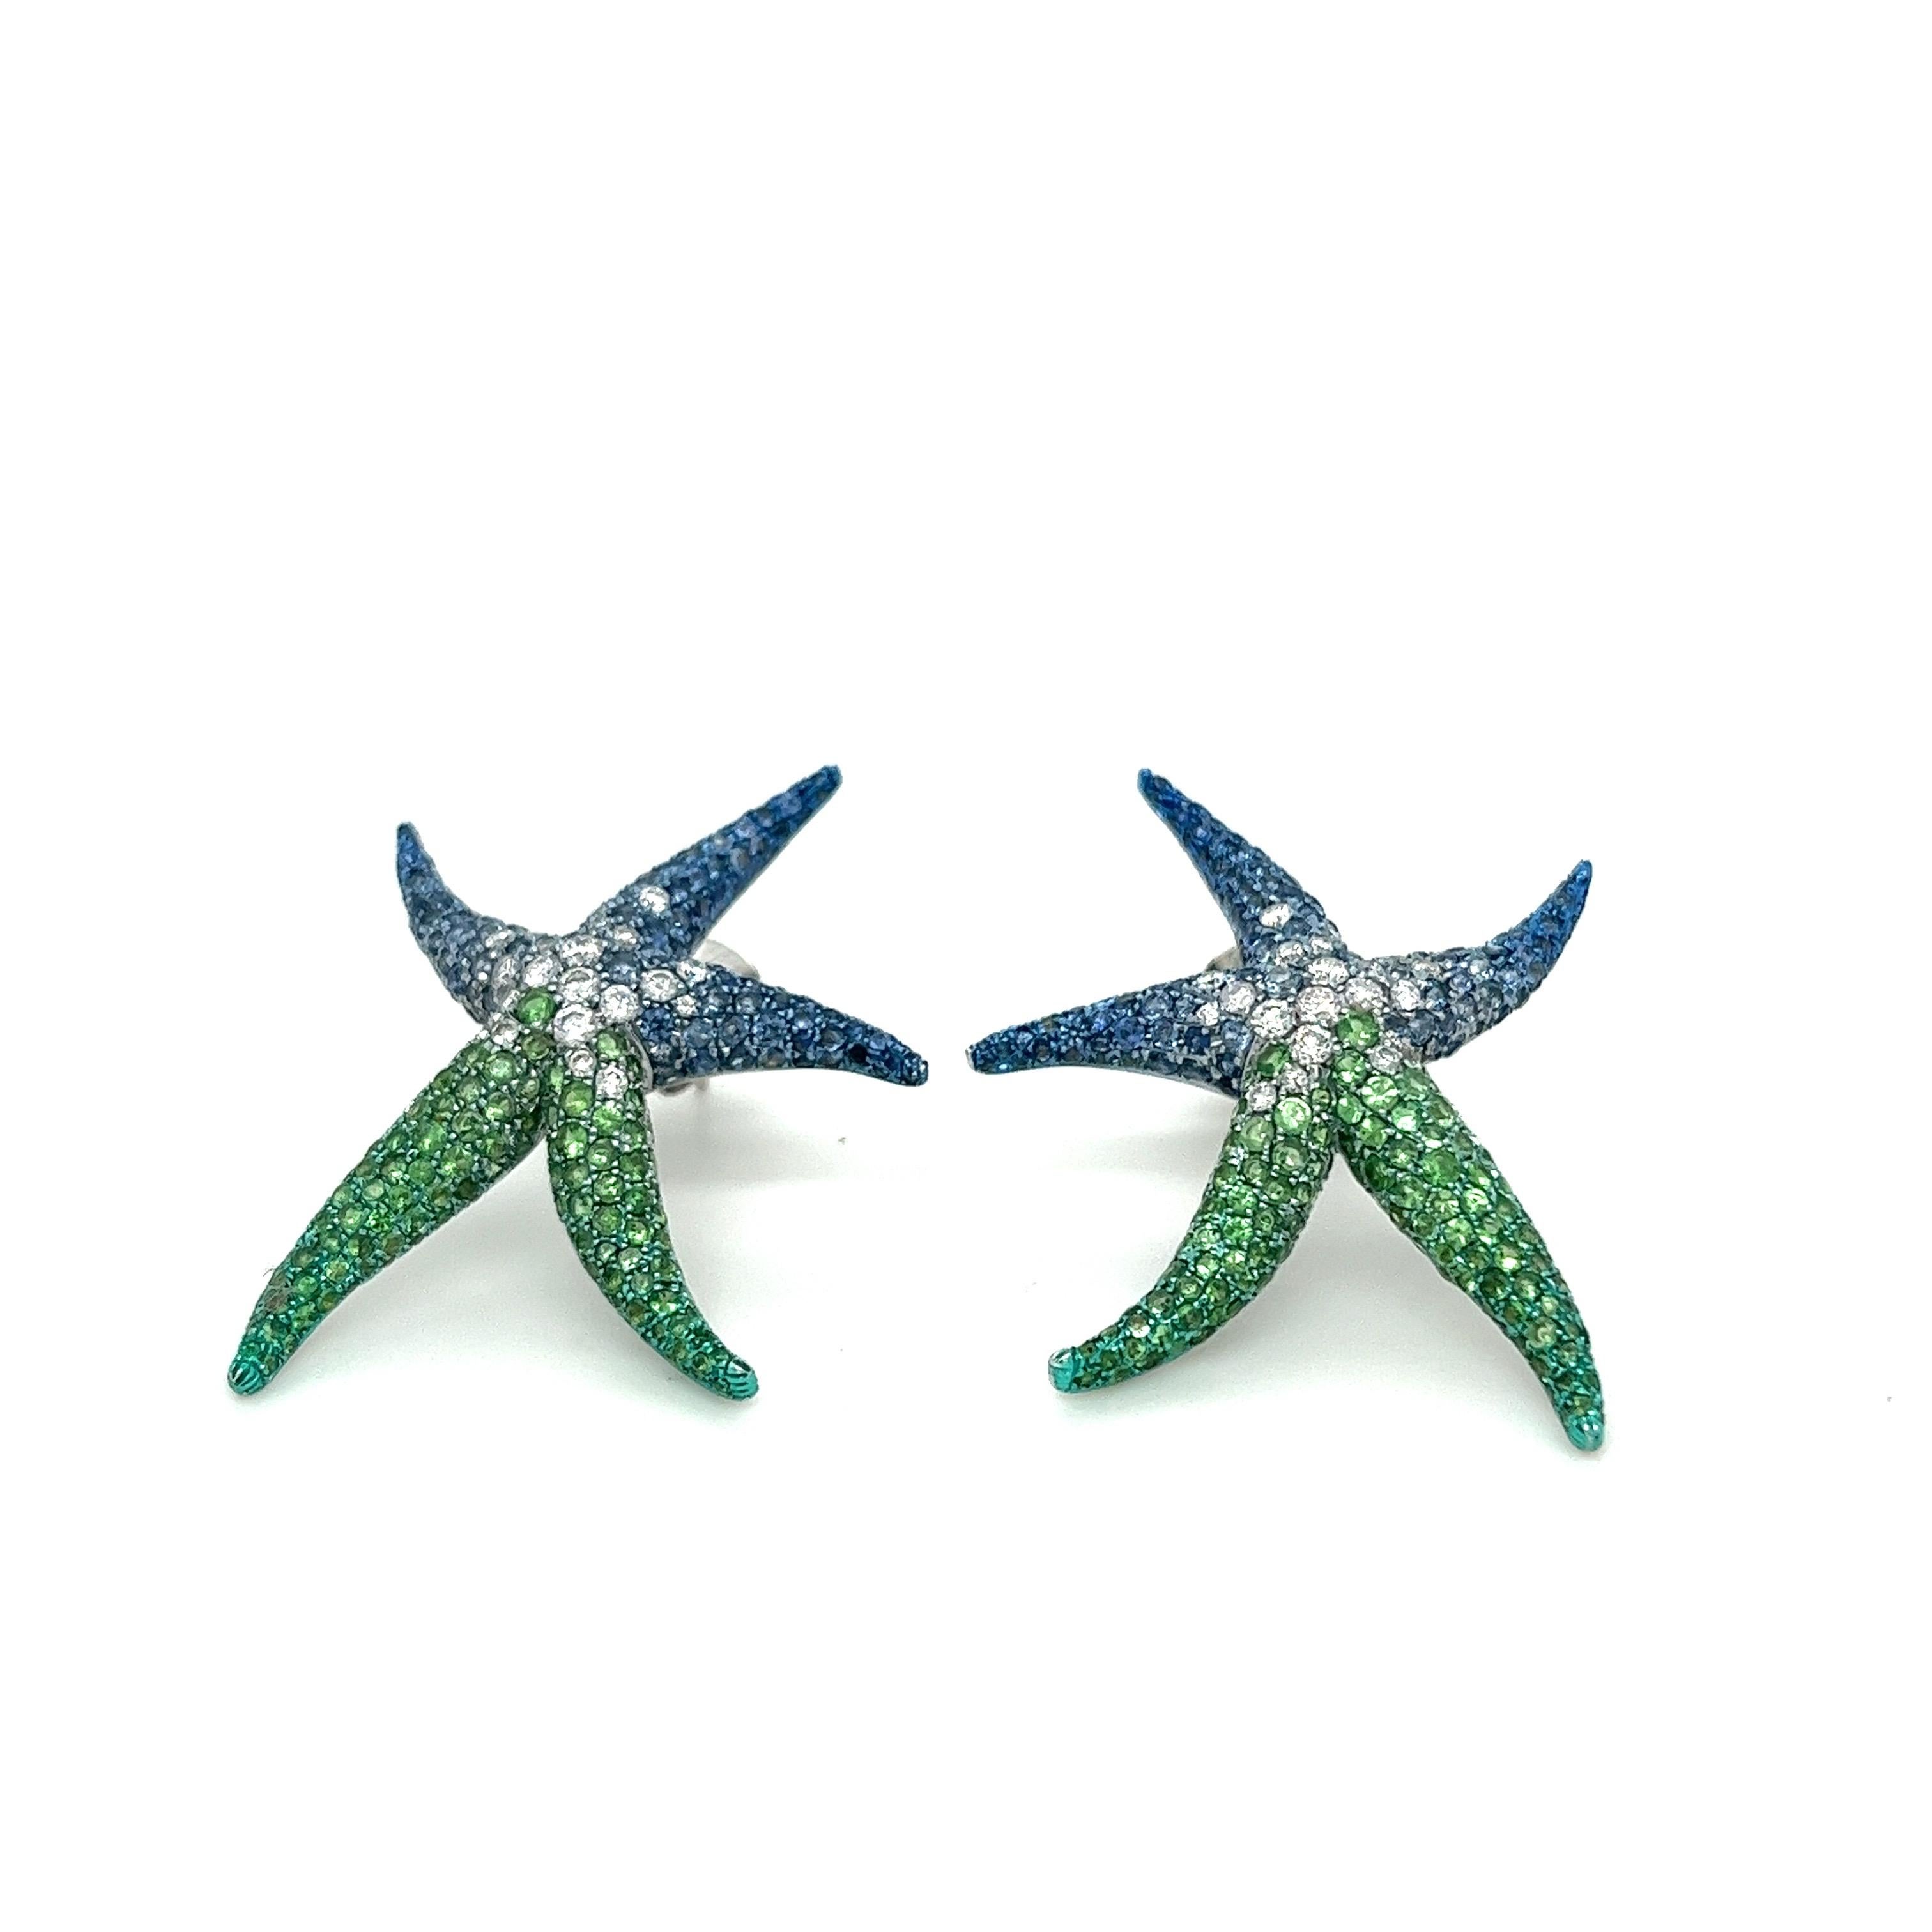 18K White Gold Diamond Earrings with Green Garnets & Sapphires

40 Diamonds - 0.72 CT
282 Green Garnets  - 3.09 CT
286 Blue Sapphires - 2.73 CT
18K White Gold - 10.67 GM

Indulge in the enchanting allure of our handcrafted starfish earrings, adorned